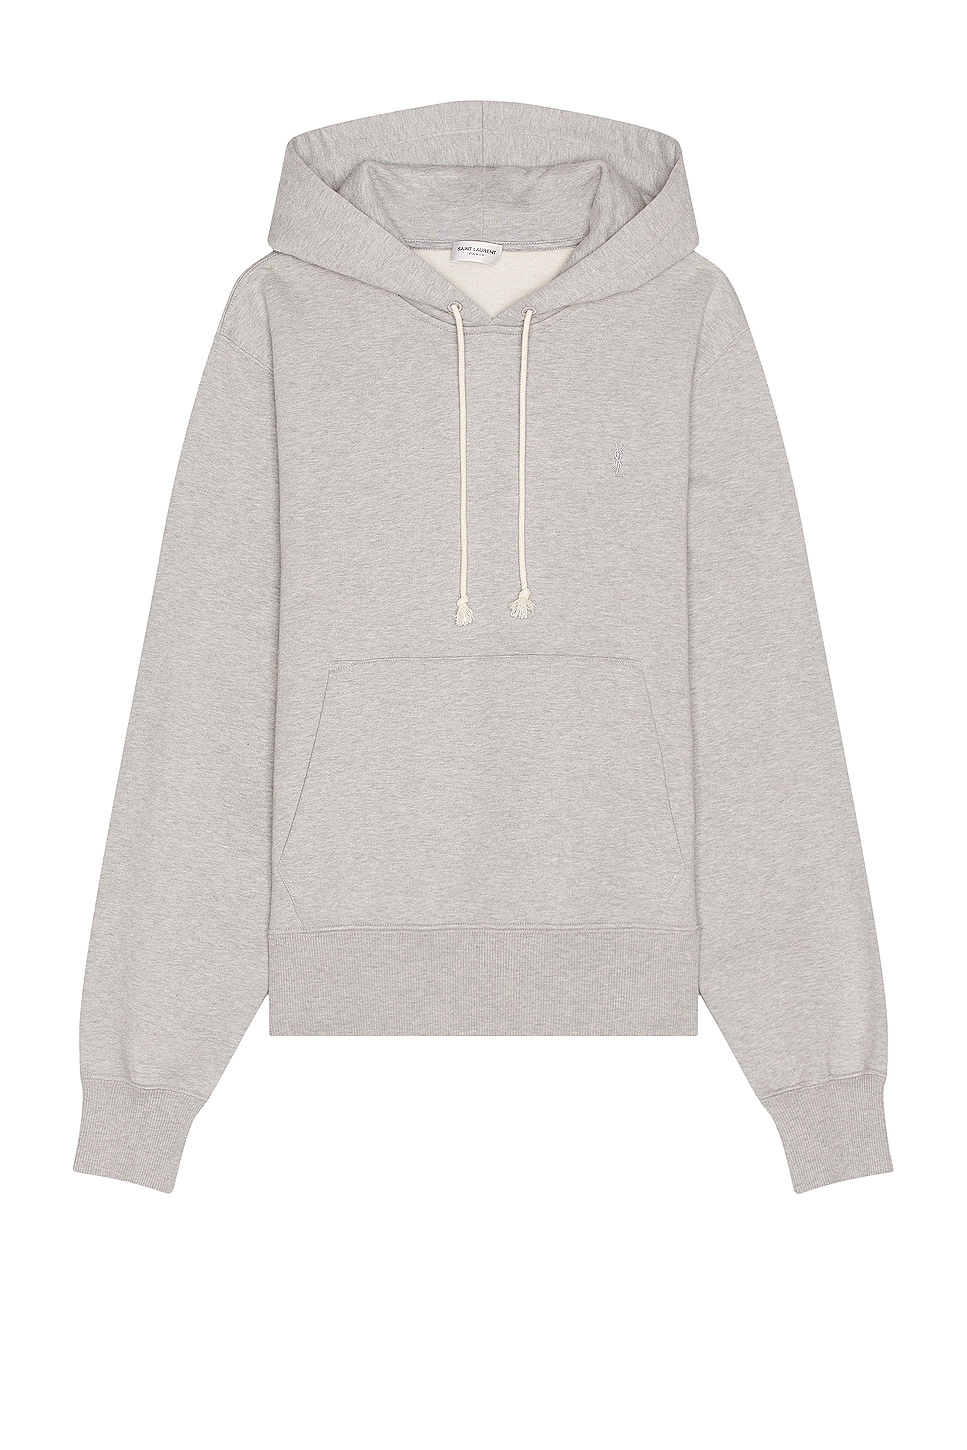 Image 1 of Saint Laurent Champion Hoodie in Gris Chine